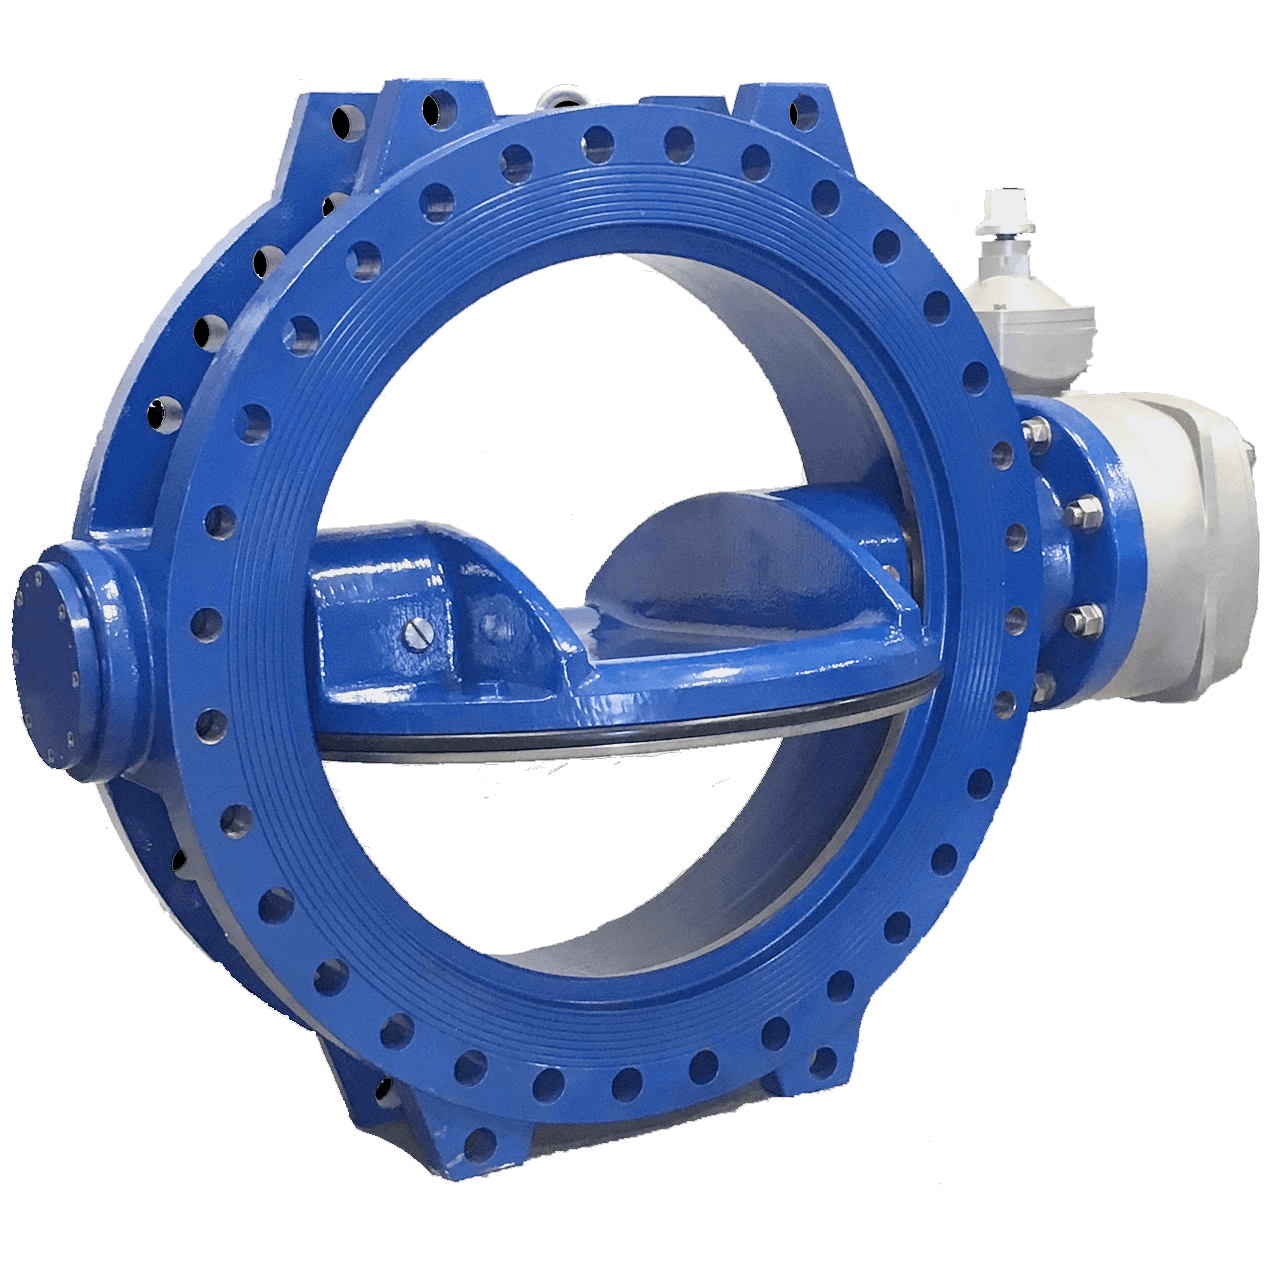 AWWA C504 Double Eccentric Butterfly Valve (2)